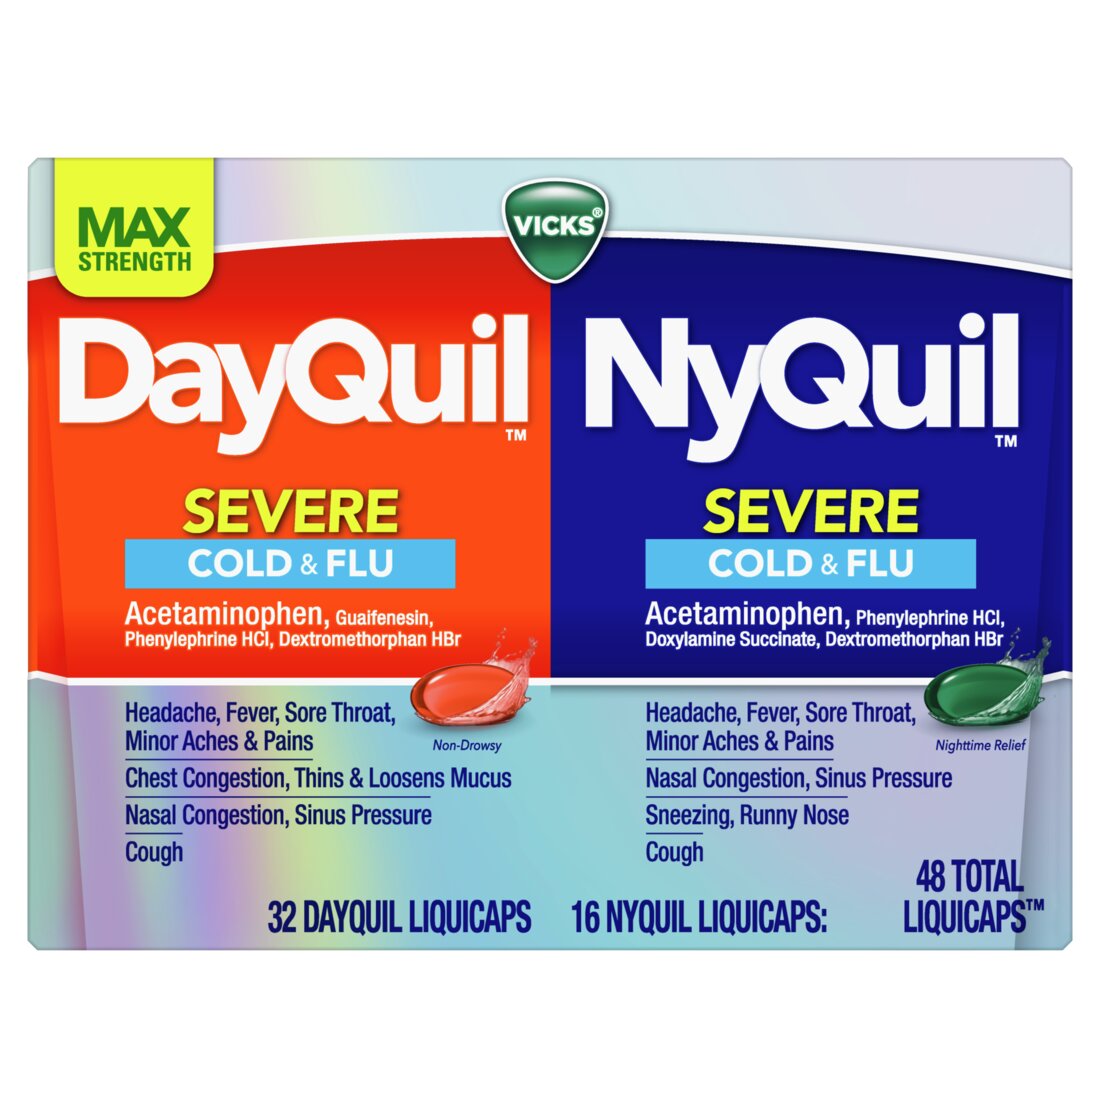 Vicks DayQuil and NyQuil SEVERE Combo Cold & Flu Medicine (32 DayQuil+16 NyQuil) - 48ct/12pk